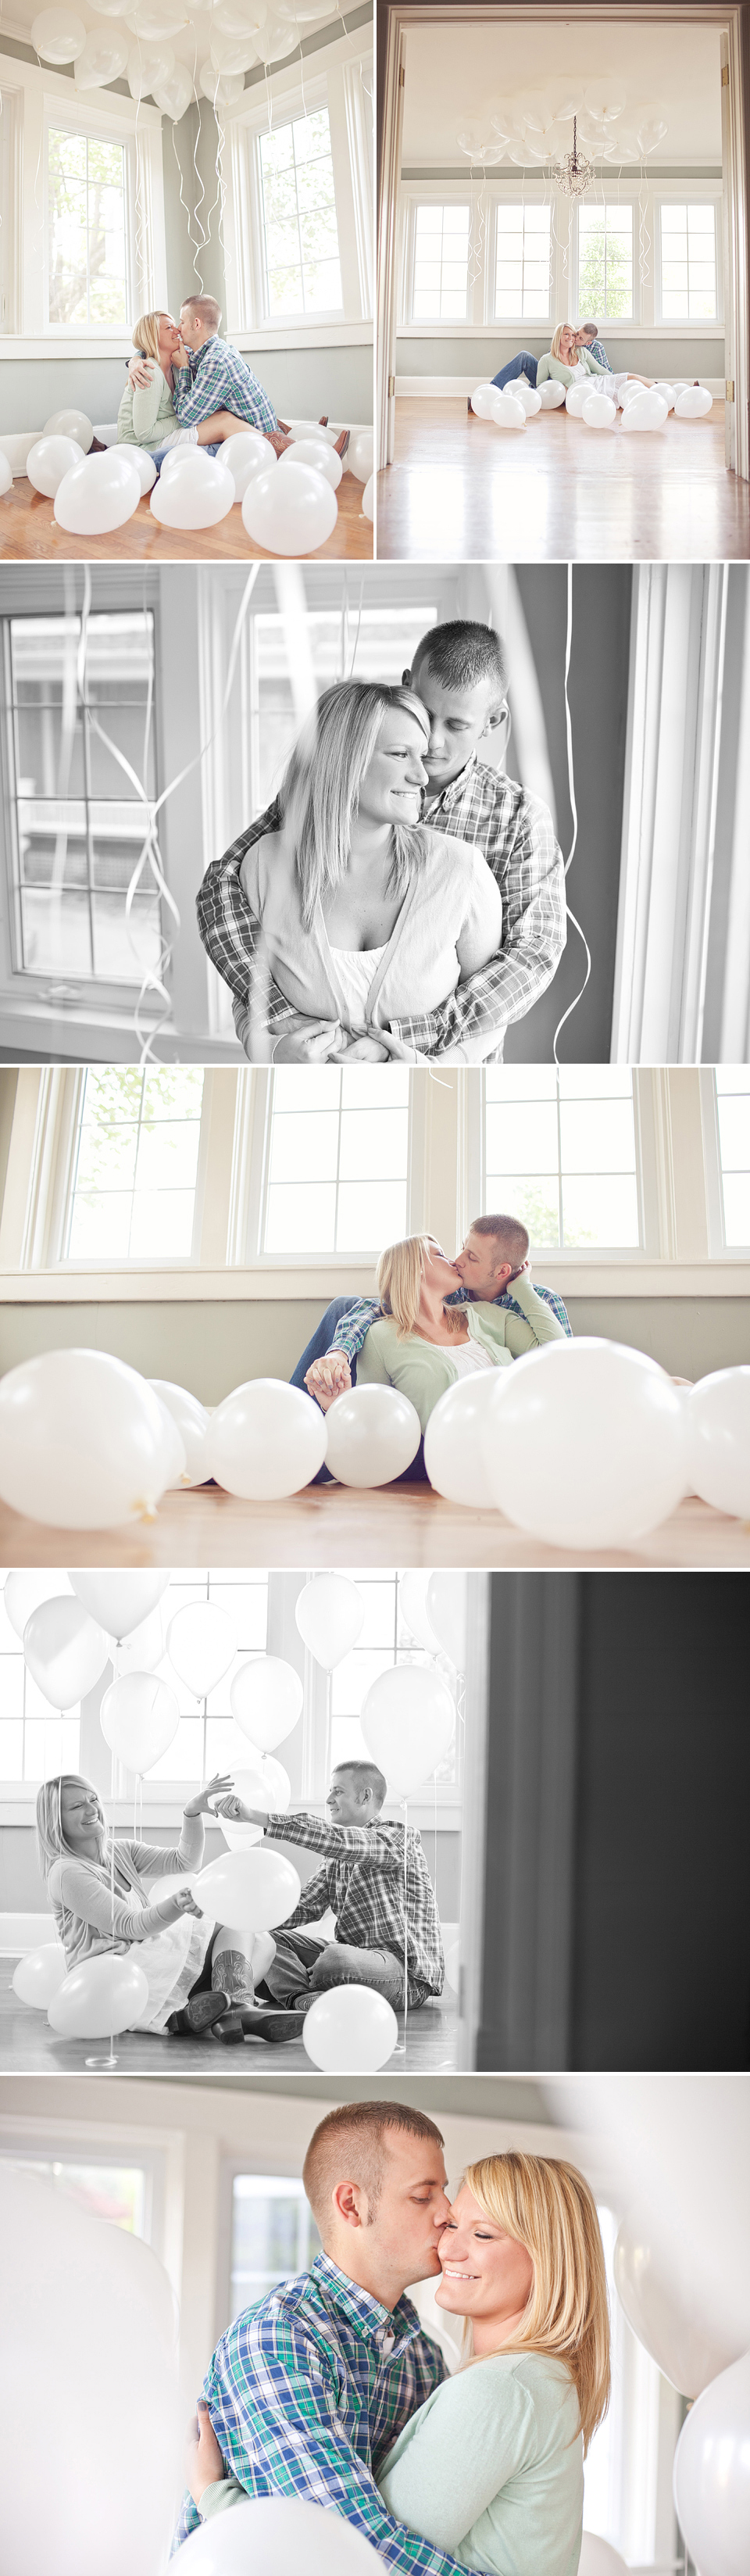 Beloved, Balloons, love, hugs, Independence photo shoots, KC portraits, Jana Marie Photography, White rooms, creative shoots, portraits